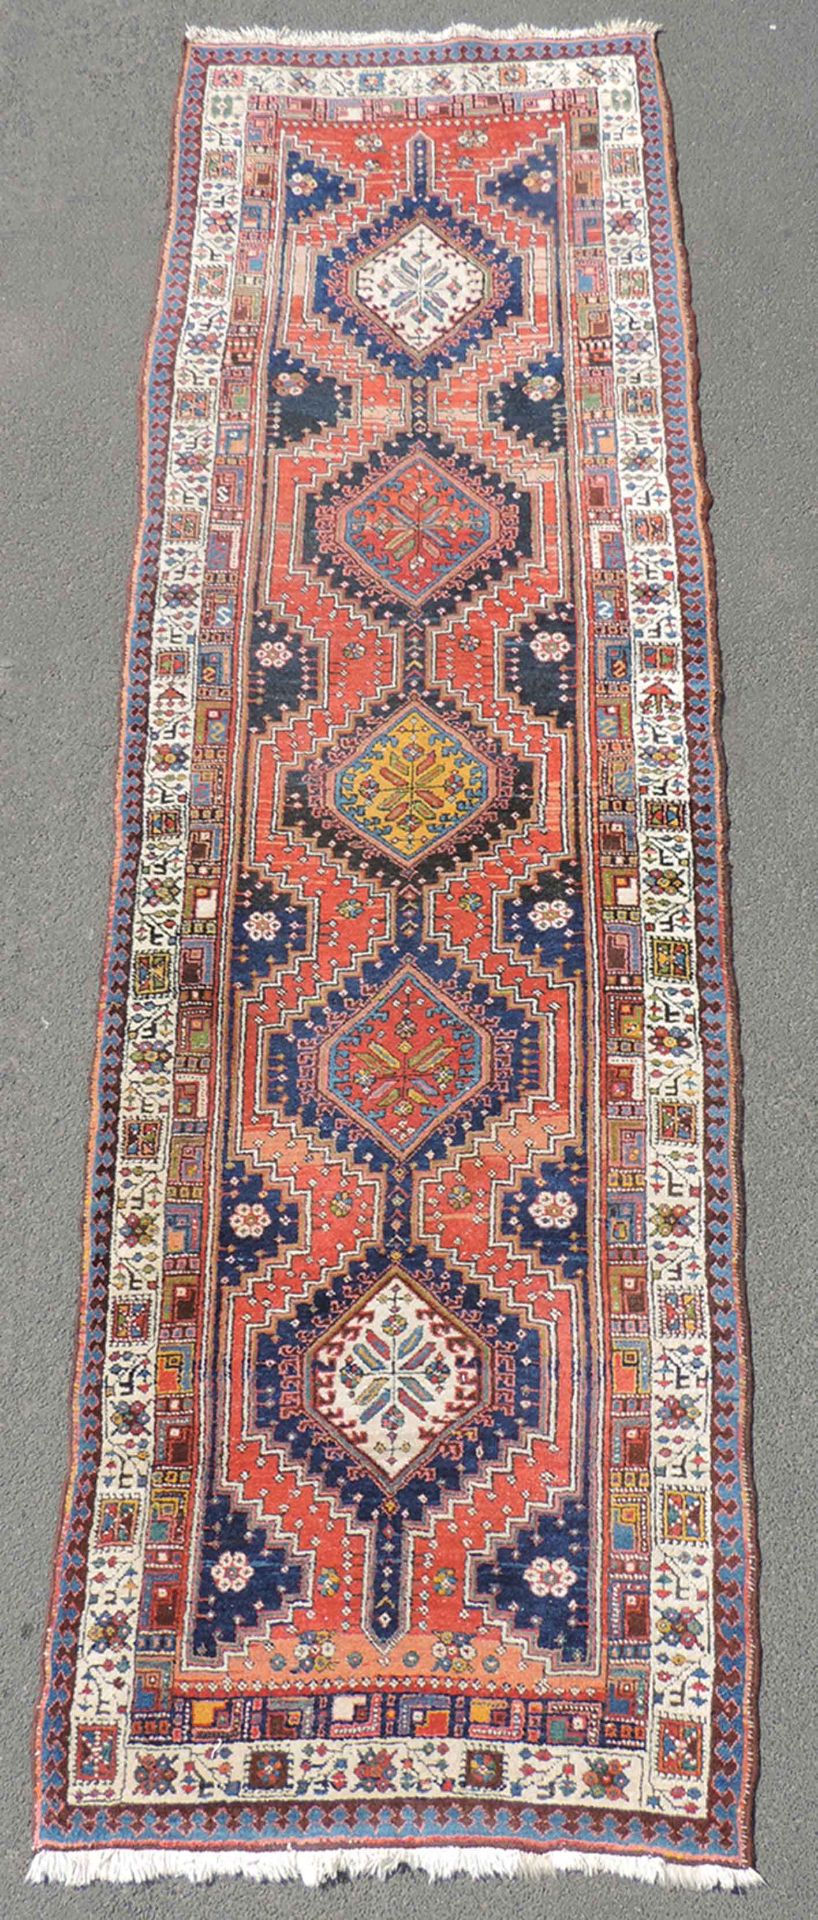 Meshkin Persian rug. Runner. Iran. Old, around 1930.323 cm x 94 cm. Knotted by hand. Wool on cotton.